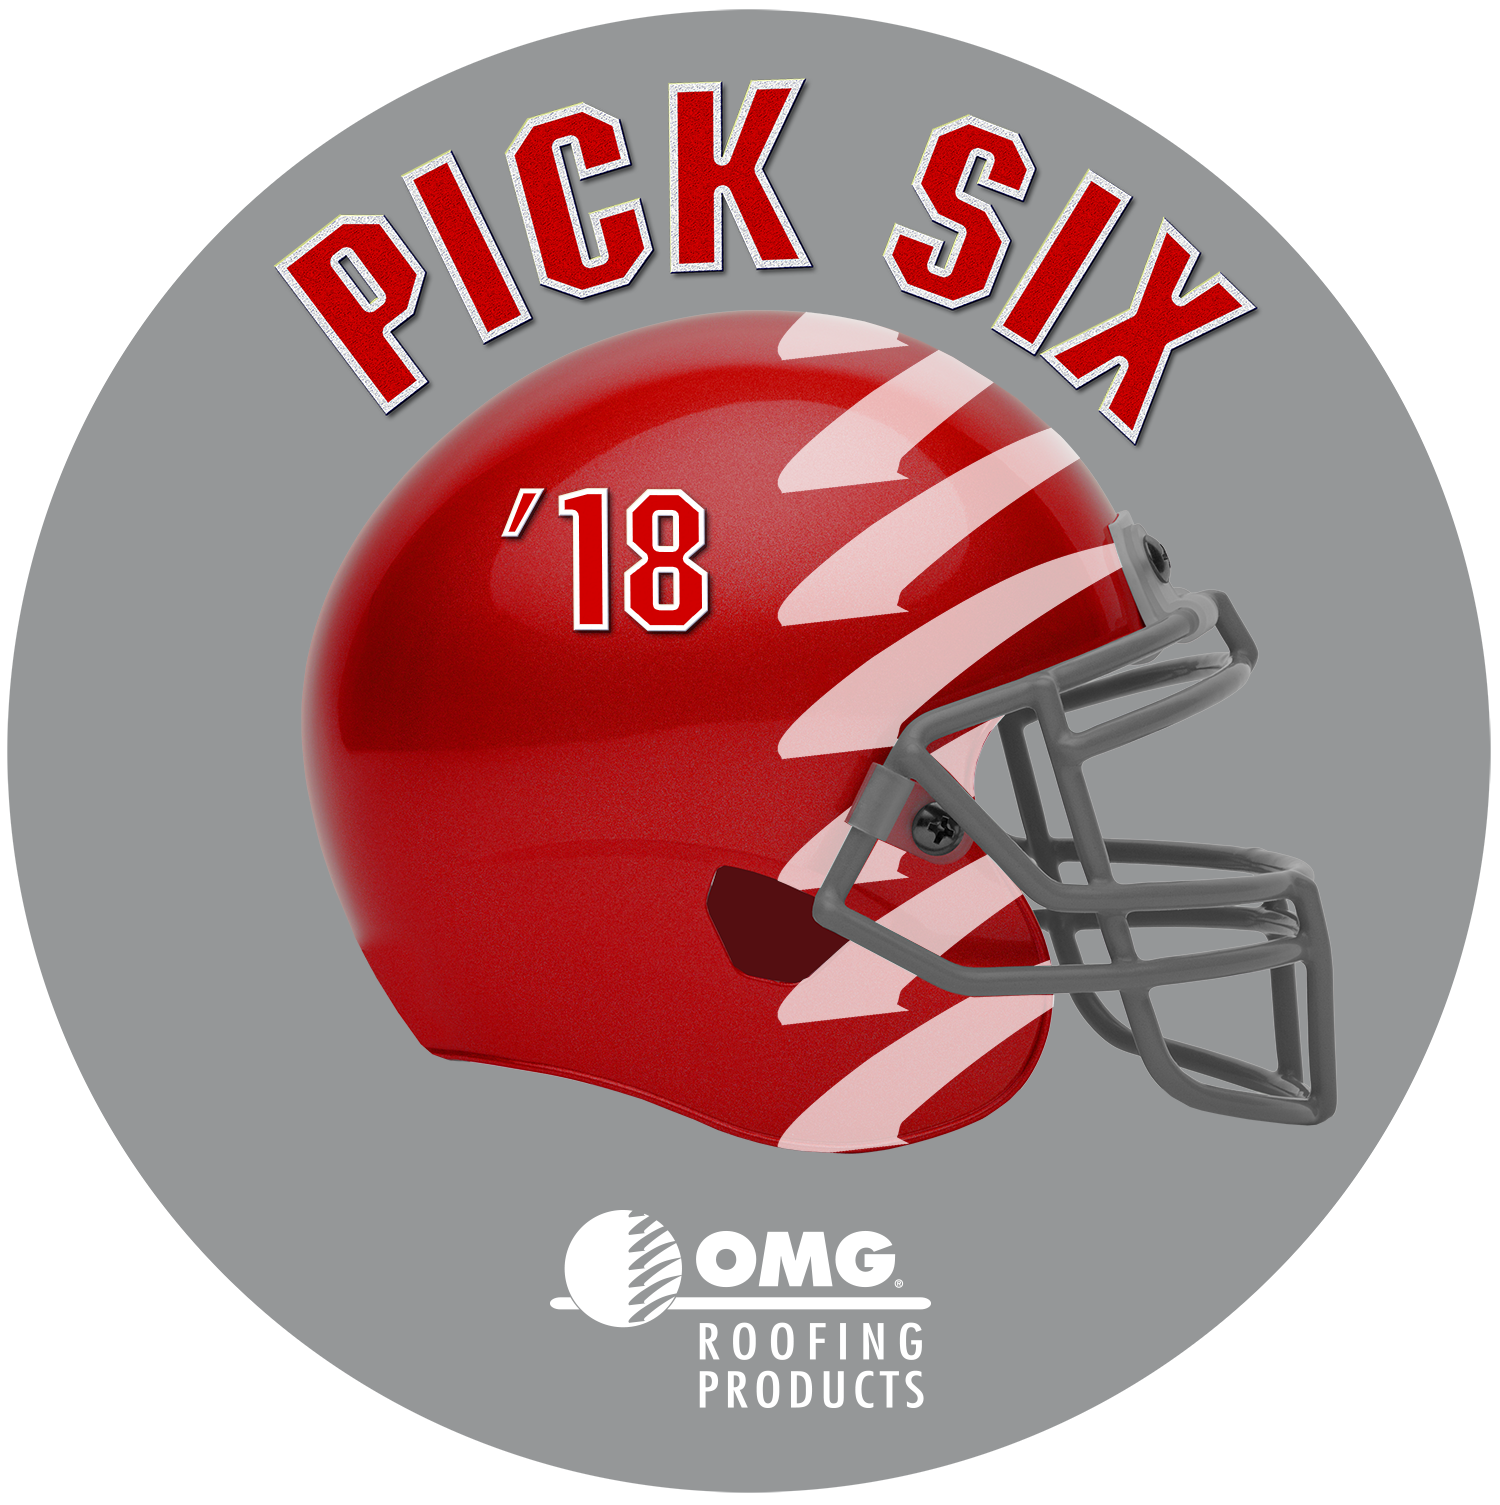 AUG - INDNews - OMG - OMG Roofing Products Relaunches Pick Six Promotion for the 2018 Football Season